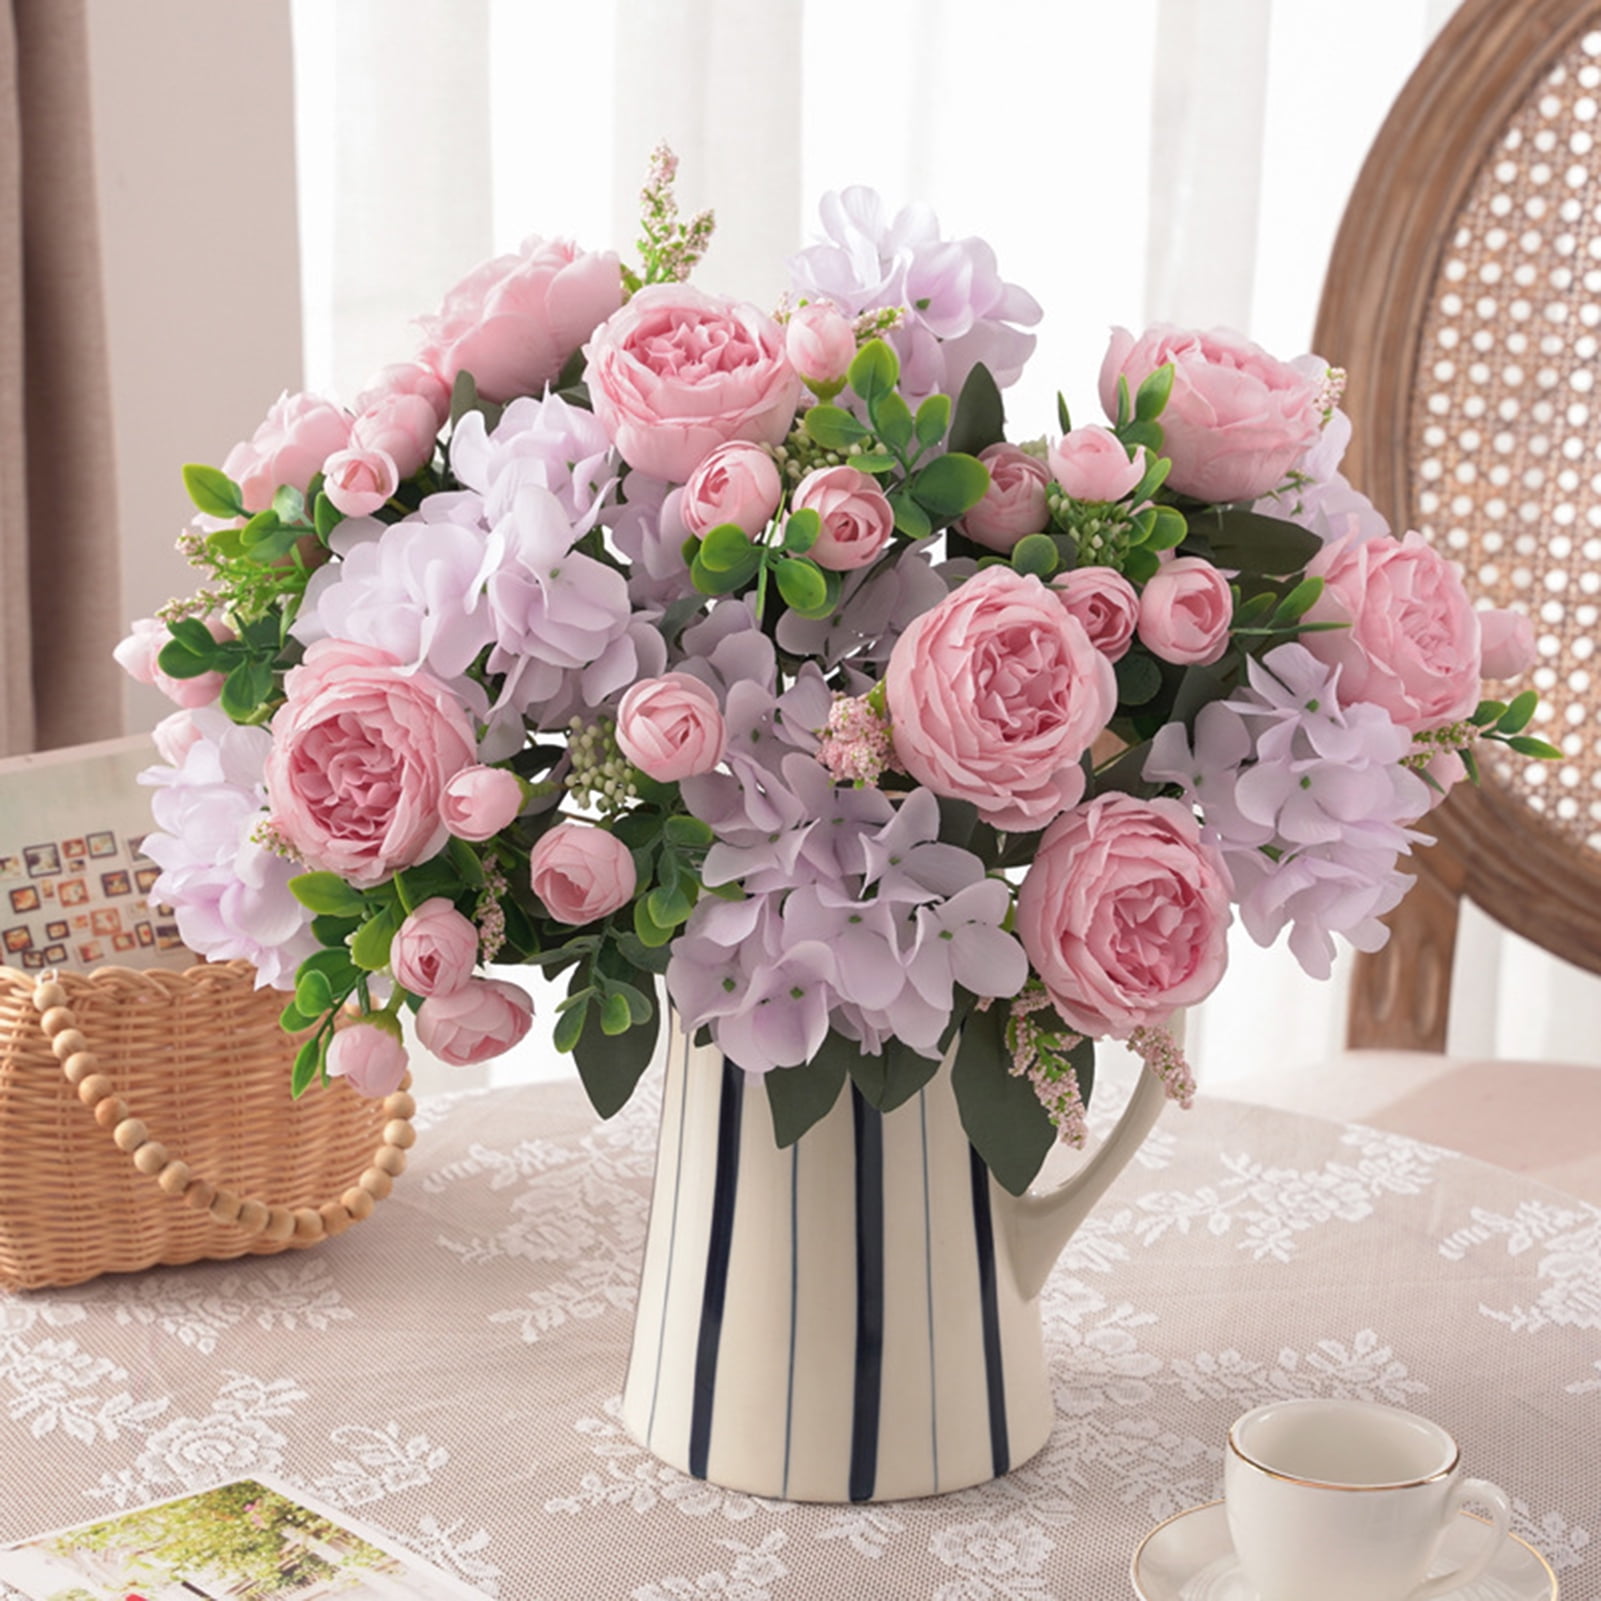 Buy Silk & Artificial Flowers Online - Real Touch And Ready To Ship